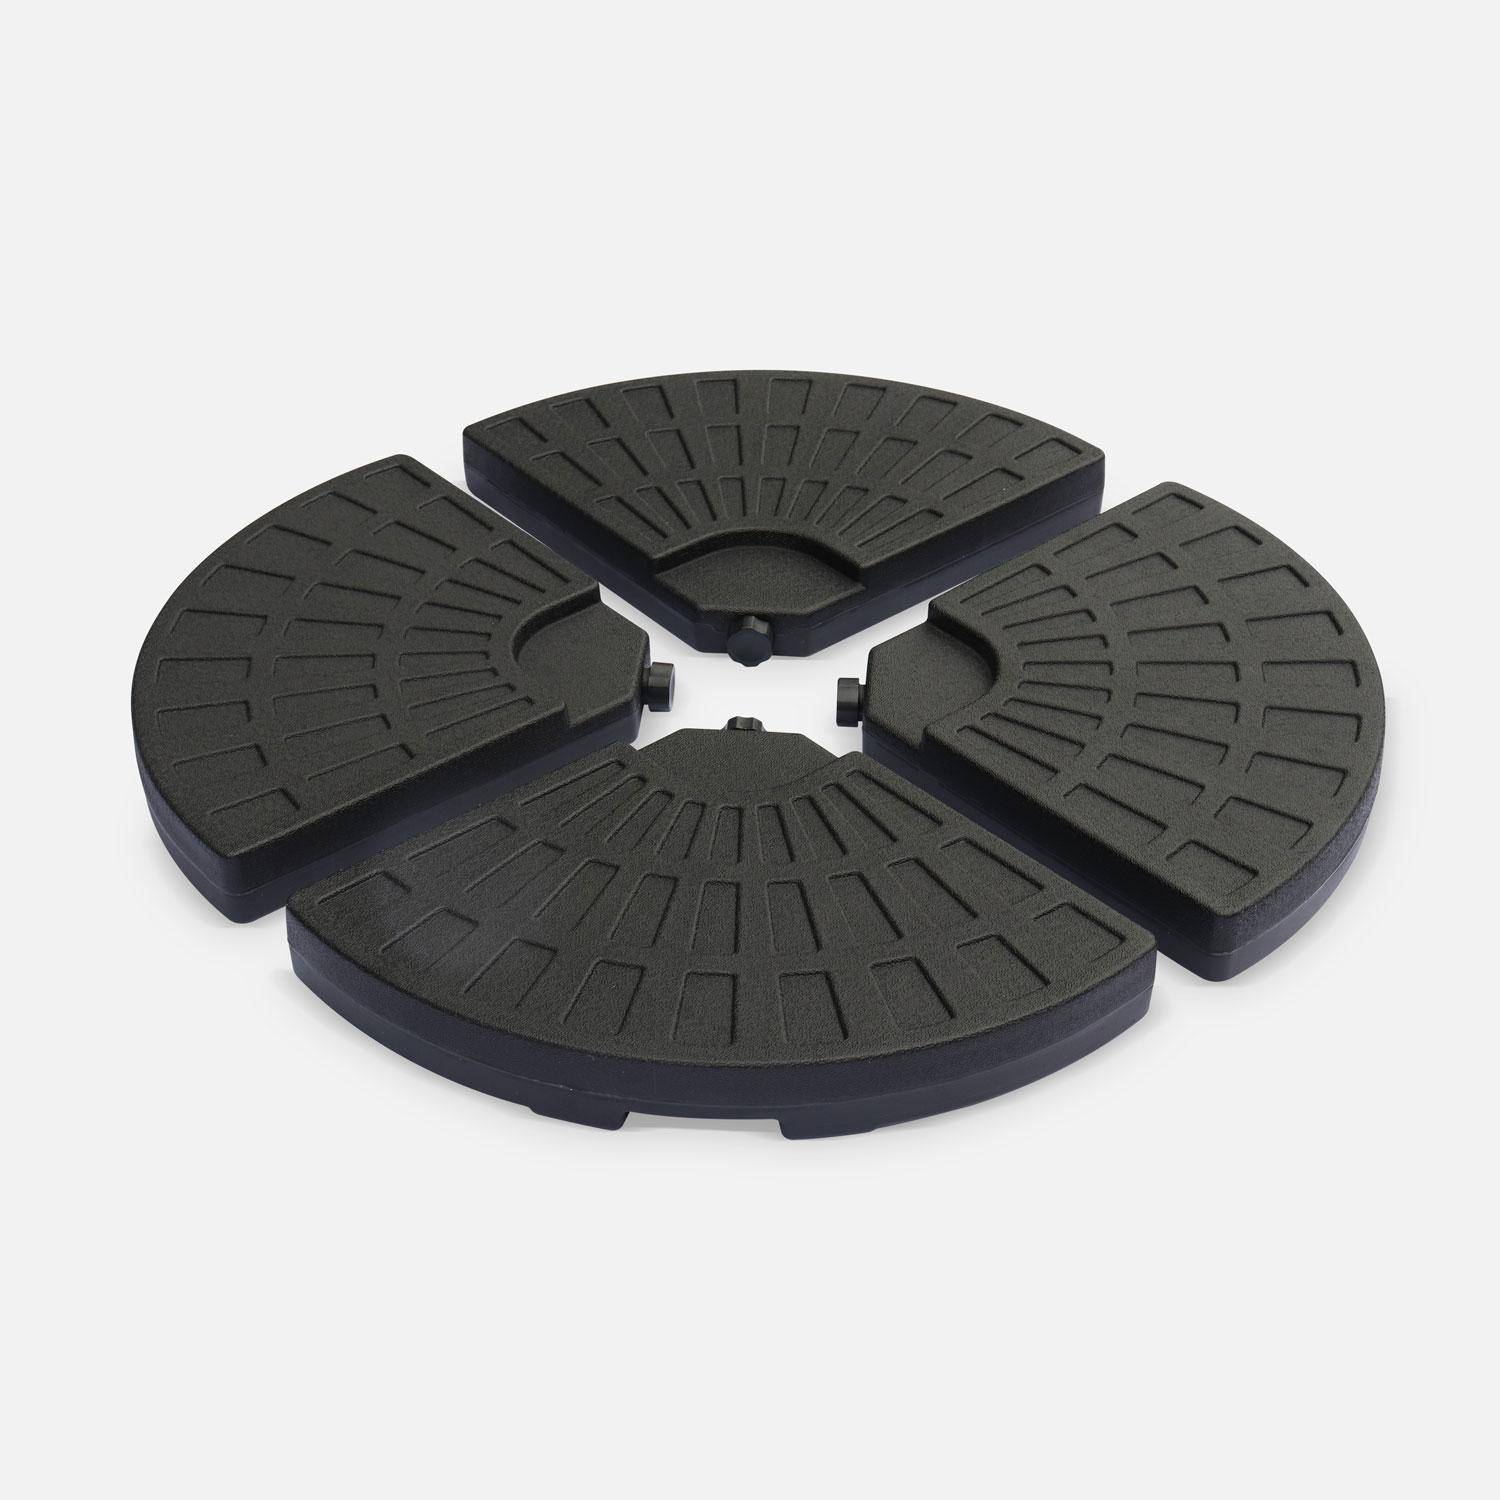 Cantilever parasol base - set of 4 rounded base weights, 48x48cm, fits parasols with cross legged base Photo1